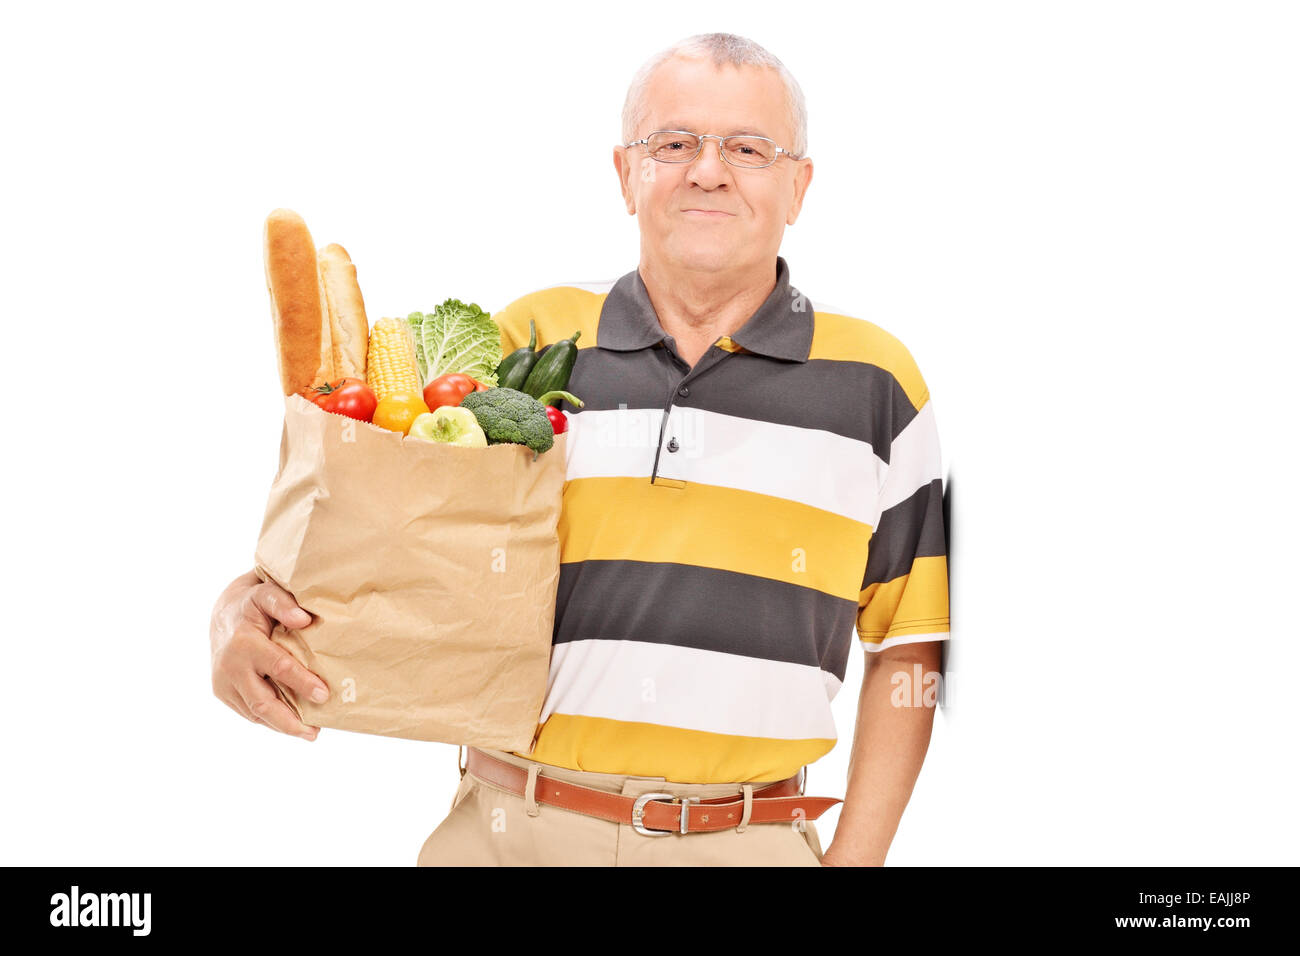 Senior gentleman posing with bag full of groceries isolated on white background Stock Photo